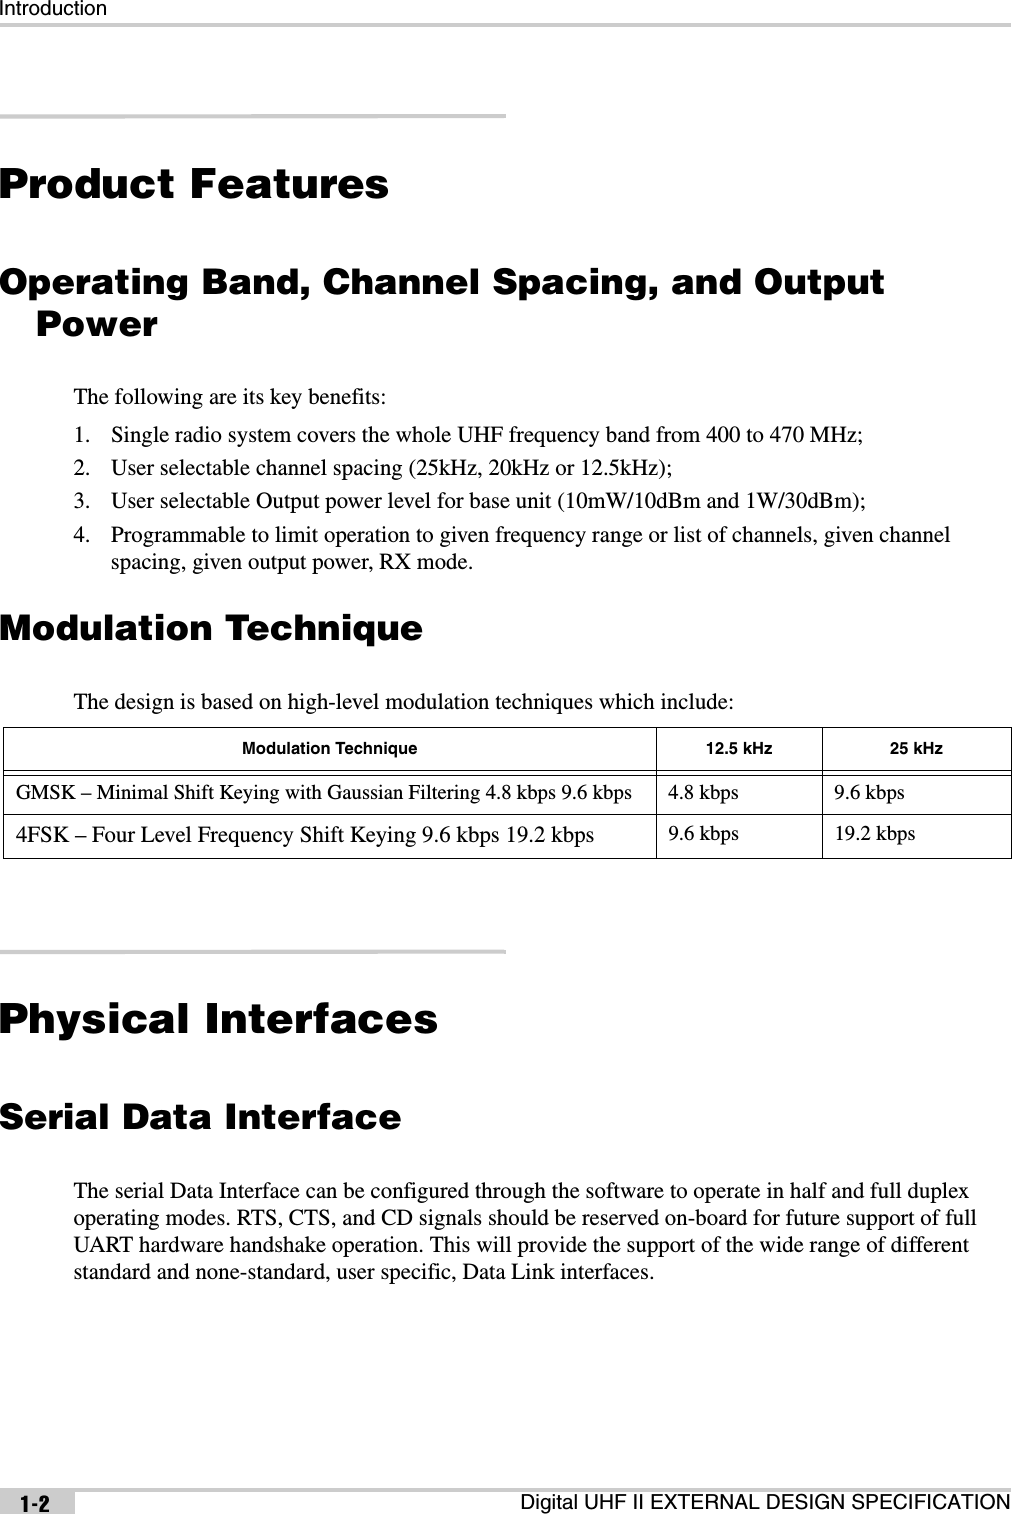 IntroductionDigital UHF II EXTERNAL DESIGN SPECIFICATION1-2Product FeaturesOperating Band, Channel Spacing, and Output PowerThe following are its key benefits:1. Single radio system covers the whole UHF frequency band from 400 to 470 MHz;2. User selectable channel spacing (25kHz, 20kHz or 12.5kHz);3. User selectable Output power level for base unit (10mW/10dBm and 1W/30dBm);4. Programmable to limit operation to given frequency range or list of channels, given channel spacing, given output power, RX mode.Modulation TechniqueThe design is based on high-level modulation techniques which include:Physical InterfacesSerial Data InterfaceThe serial Data Interface can be configured through the software to operate in half and full duplex operating modes. RTS, CTS, and CD signals should be reserved on-board for future support of full UART hardware handshake operation. This will provide the support of the wide range of different standard and none-standard, user specific, Data Link interfaces.Modulation Technique 12.5 kHz 25 kHzGMSK – Minimal Shift Keying with Gaussian Filtering 4.8 kbps 9.6 kbps 4.8 kbps 9.6 kbps4FSK – Four Level Frequency Shift Keying 9.6 kbps 19.2 kbps 9.6 kbps 19.2 kbps